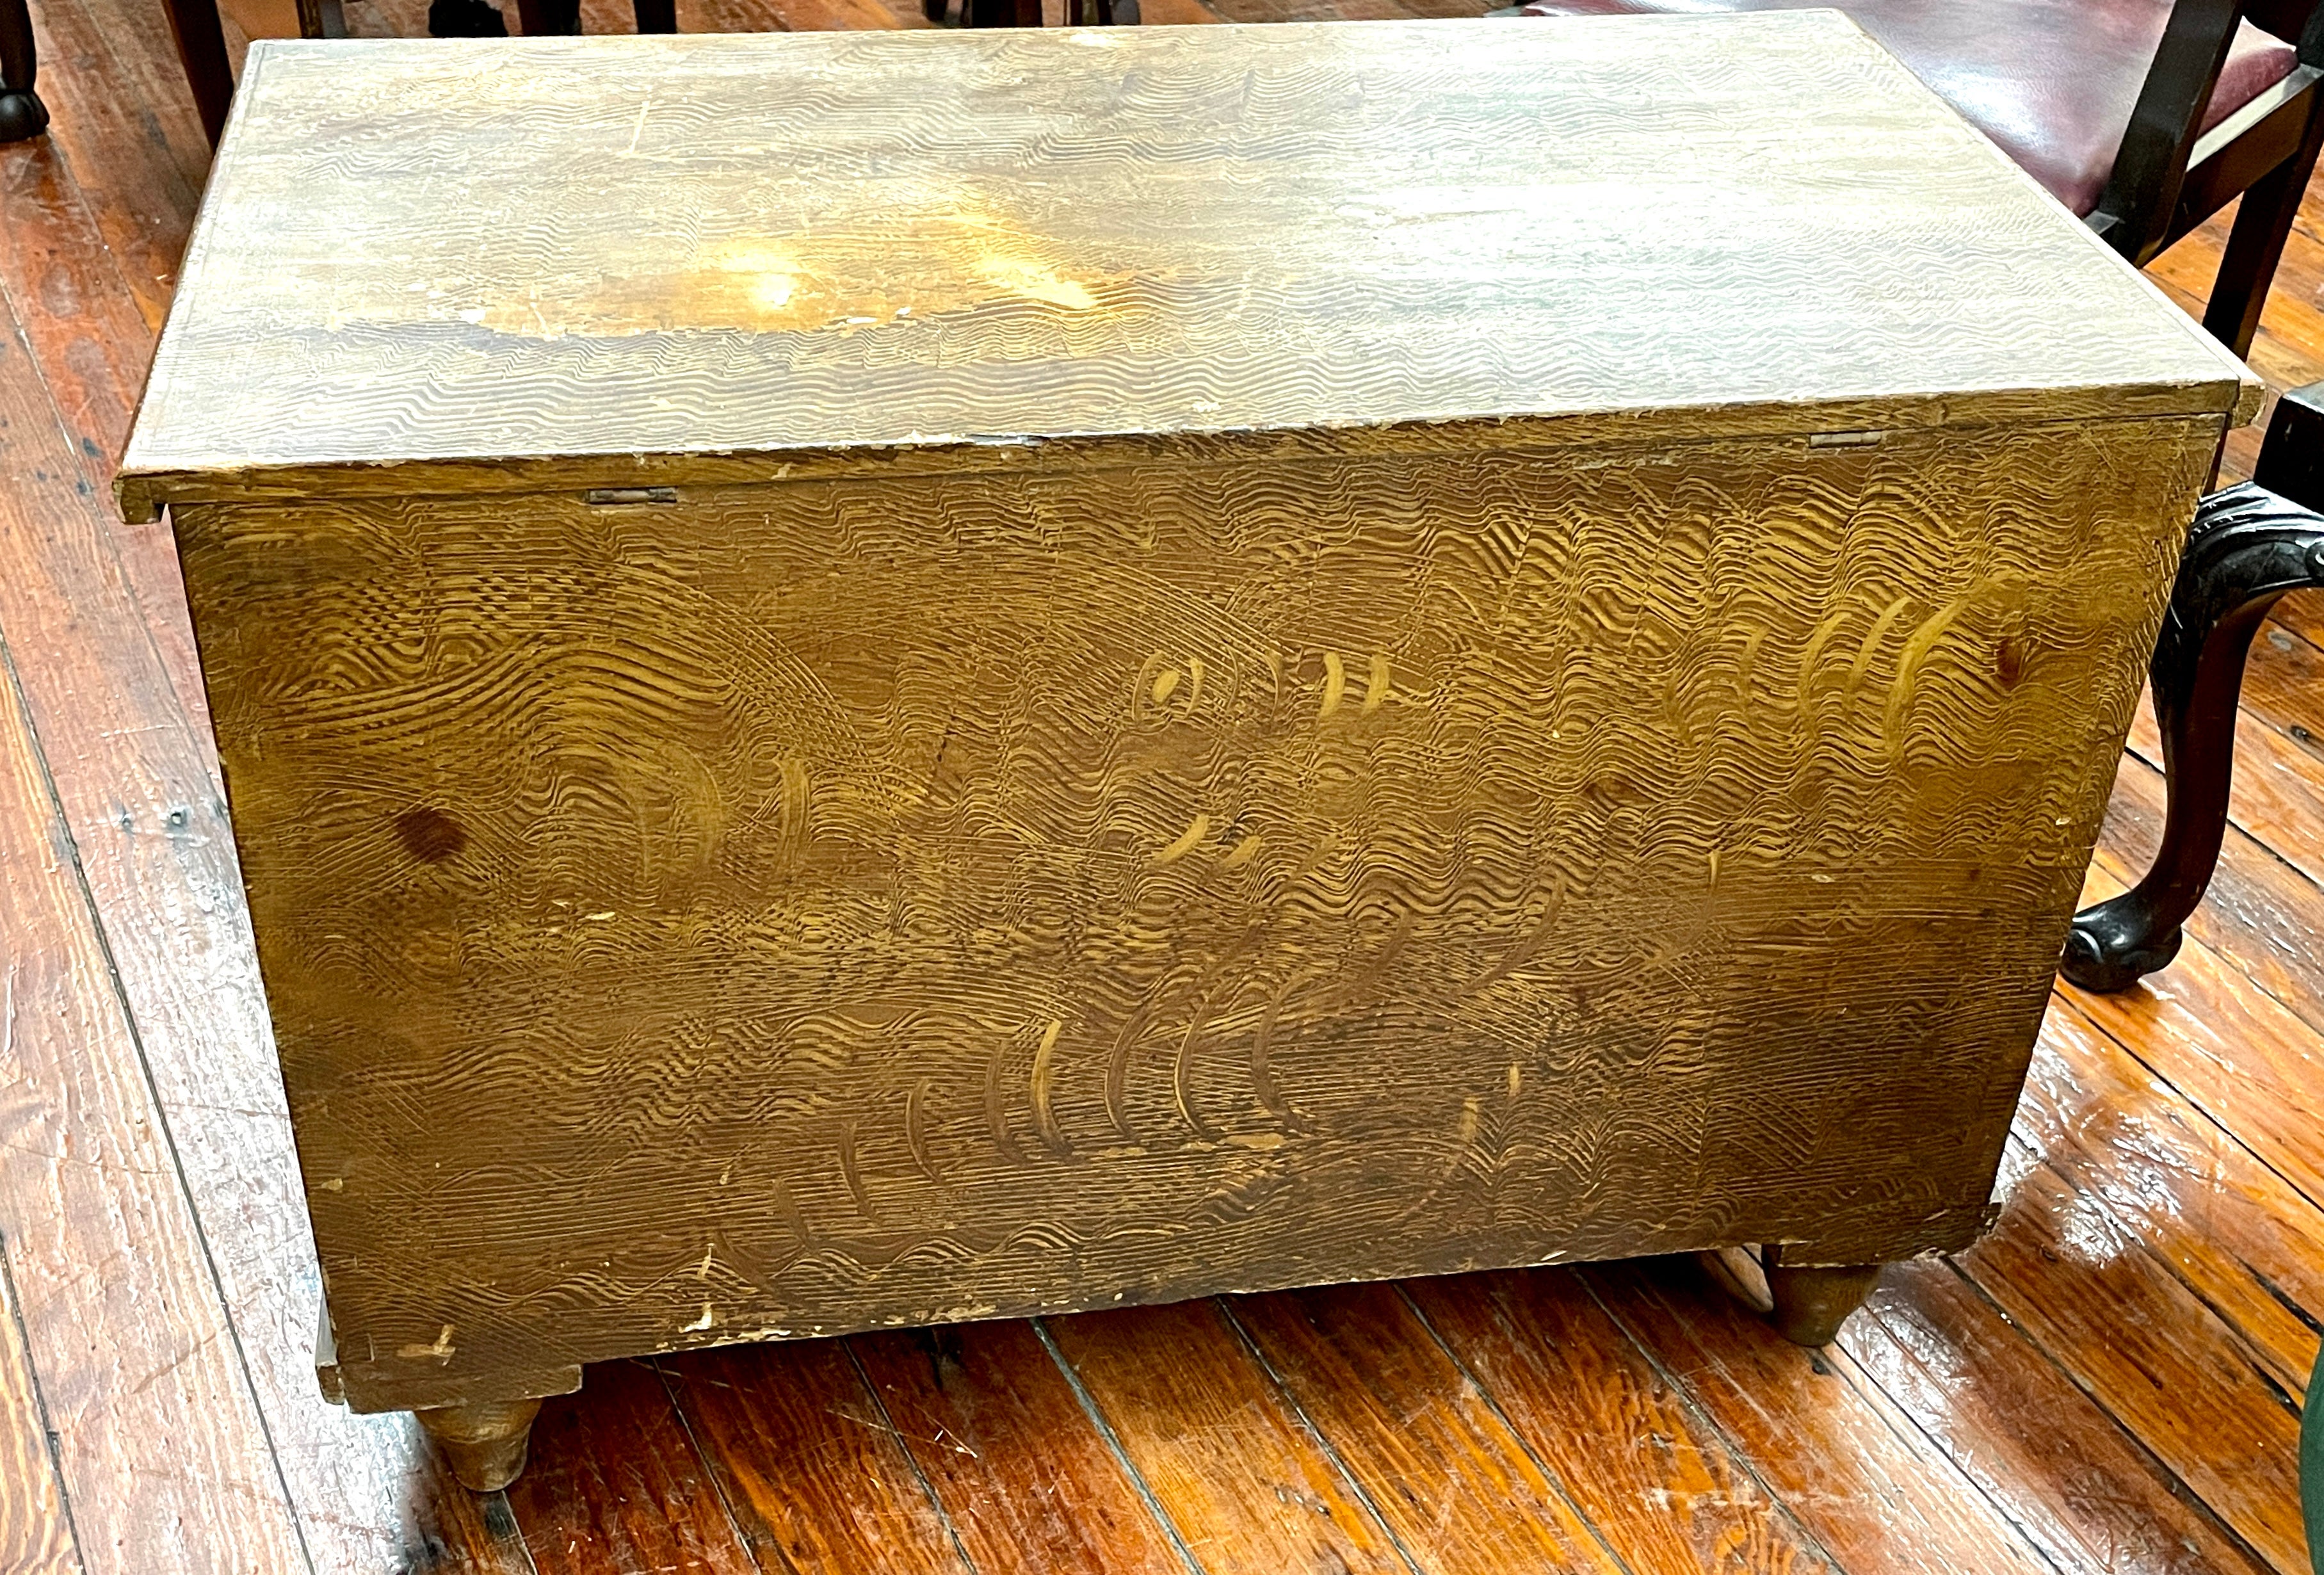 Rare antique English Pine original hand painted faux grain Deacon's trunk. The interior reveals the old steel strap hinges and a deacon's box.

Please note the original faux grain paint, handles, hinges, and locks are in wonderful age-appropriate